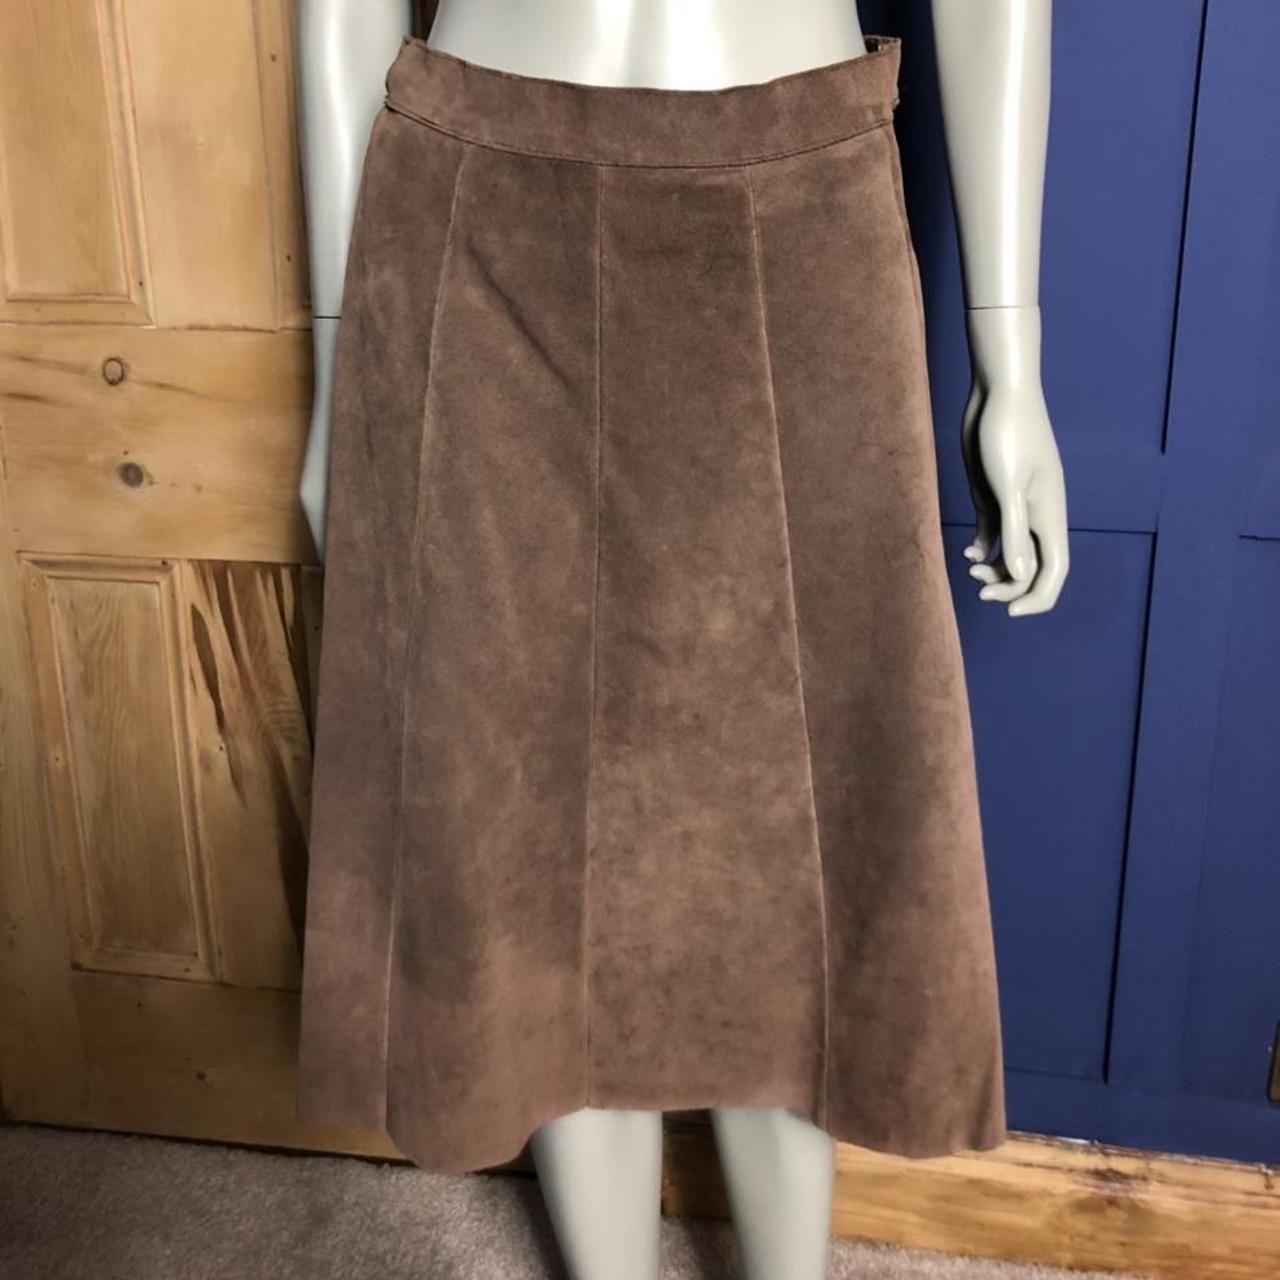 Vintage 1970’s brown suede and leather 2 piece skirt - Depop